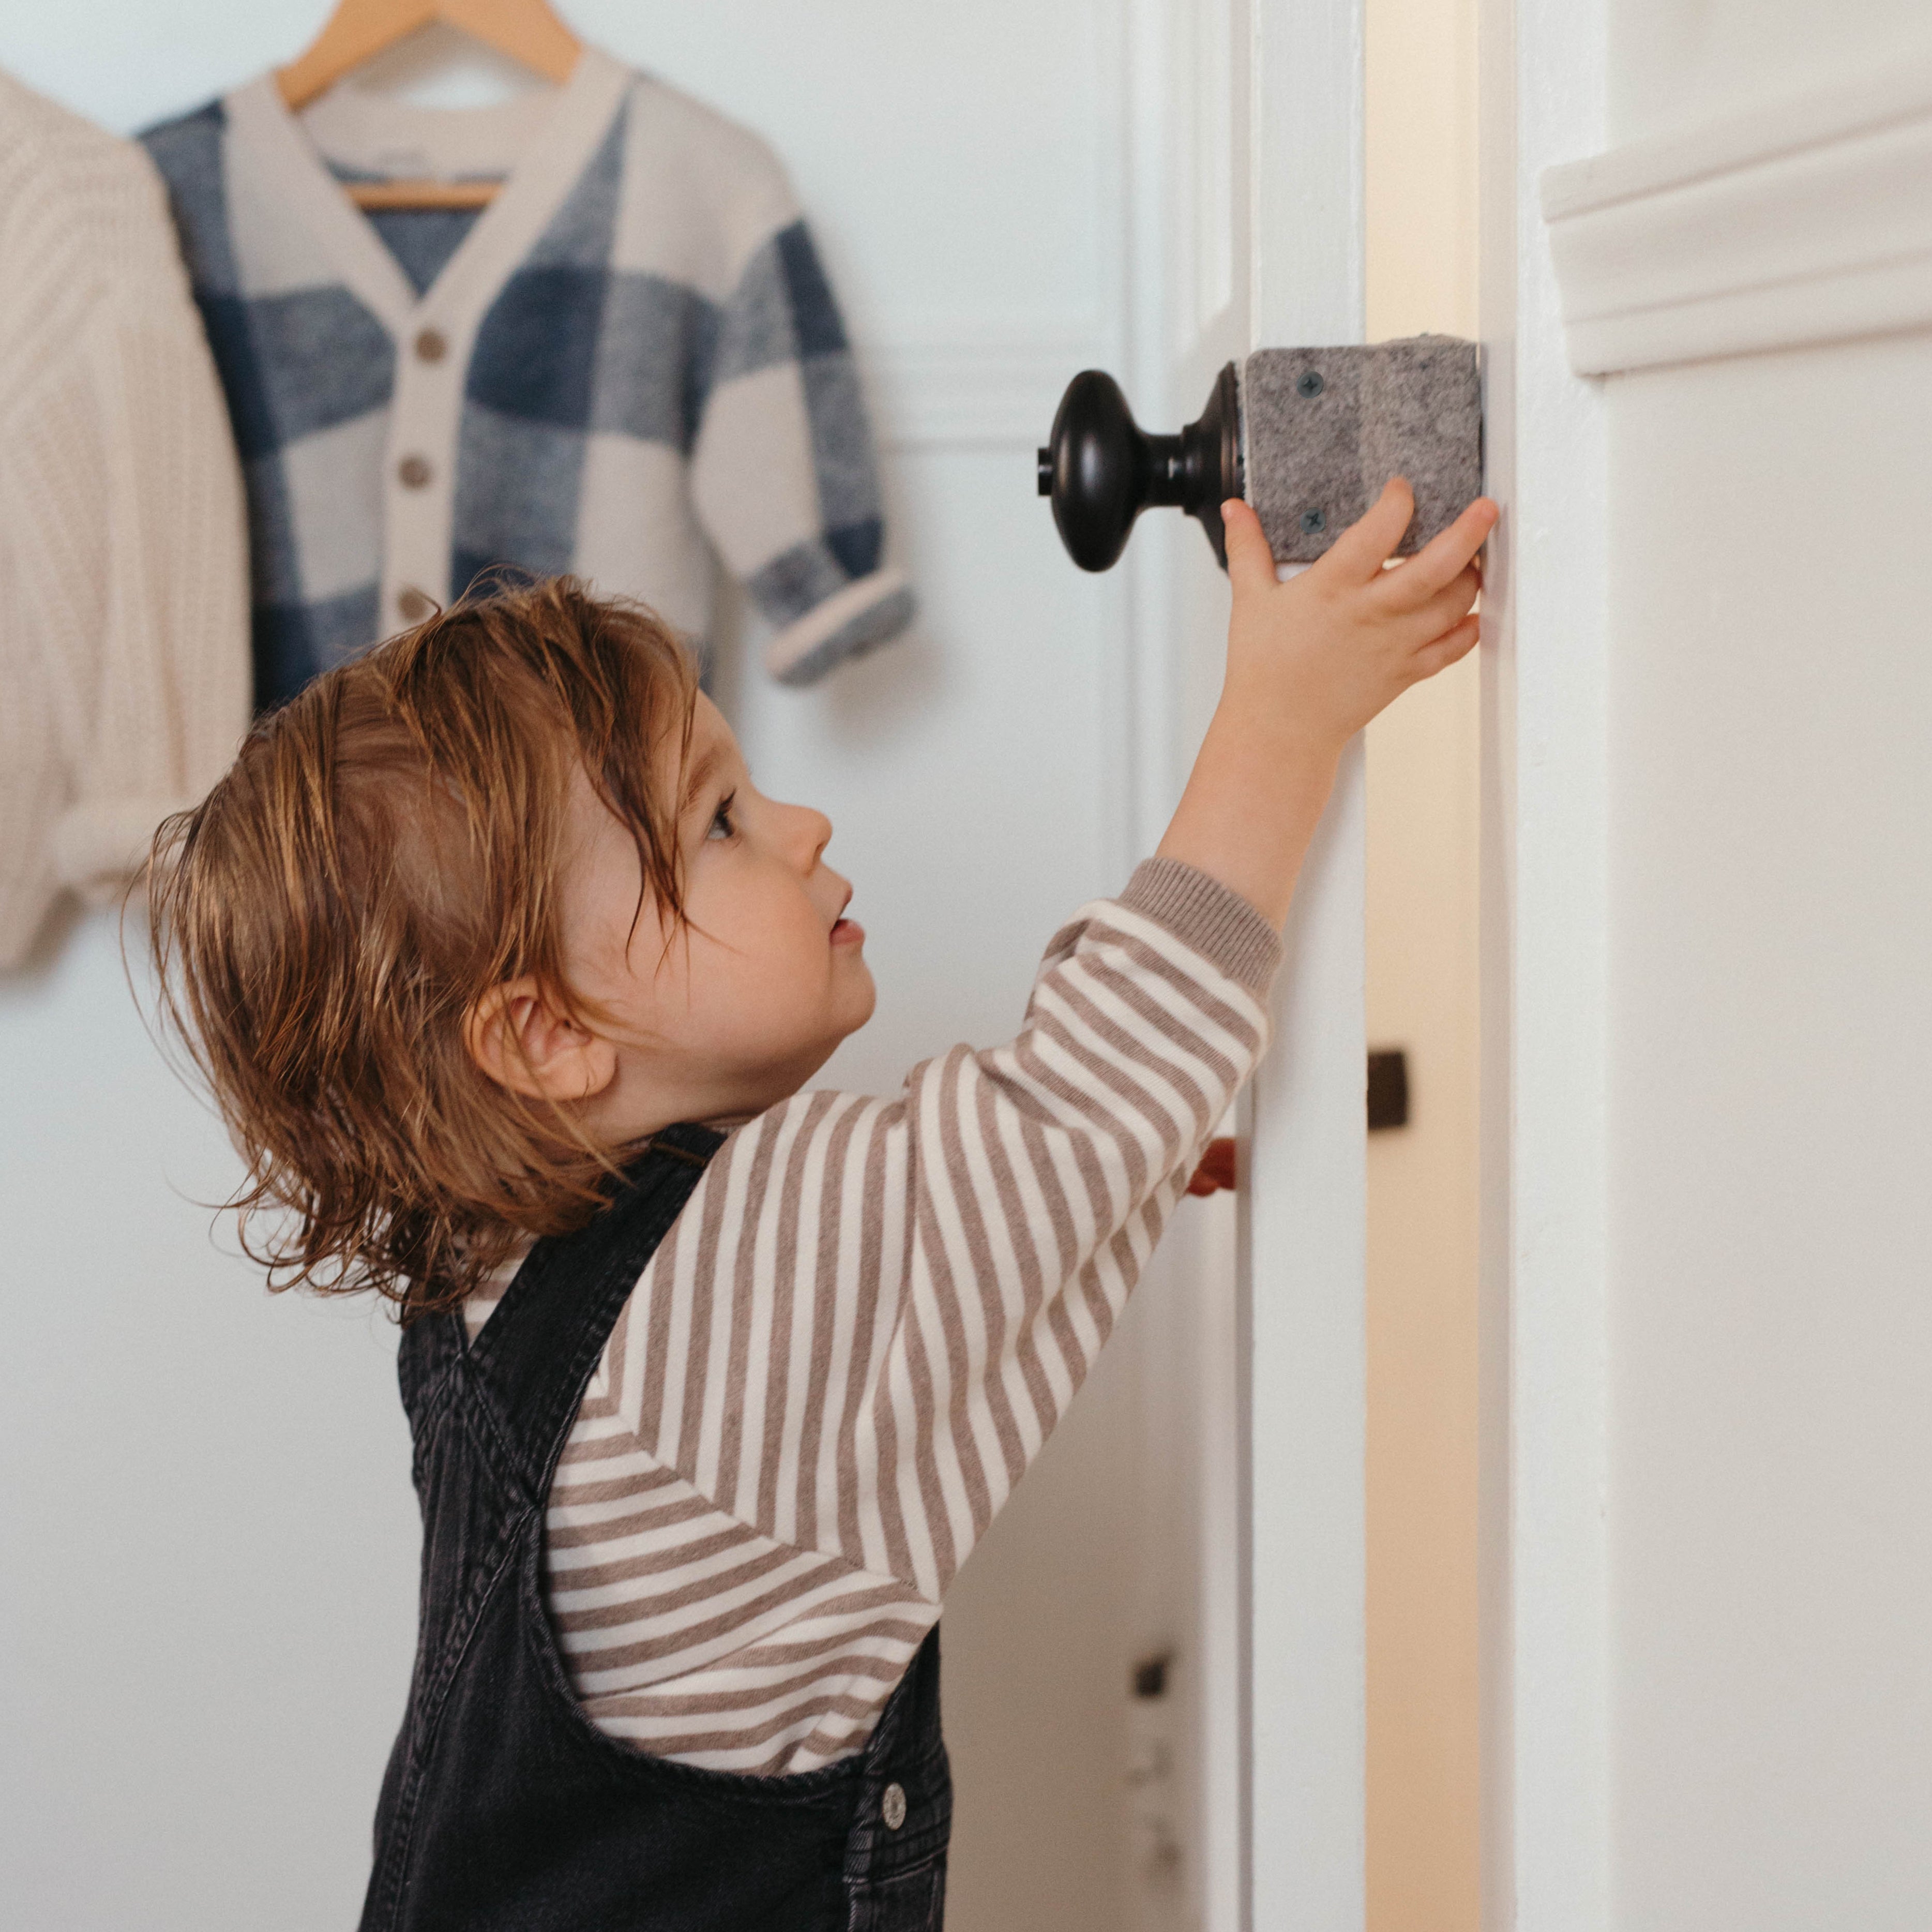 A toddler reaching up to grasp the Oolie Shoosh door silencer and safety bumper, shown installed in Bumper Mode, which prevents the door from closing fully, thereby protecting children's fingers from getting pinched in the door.